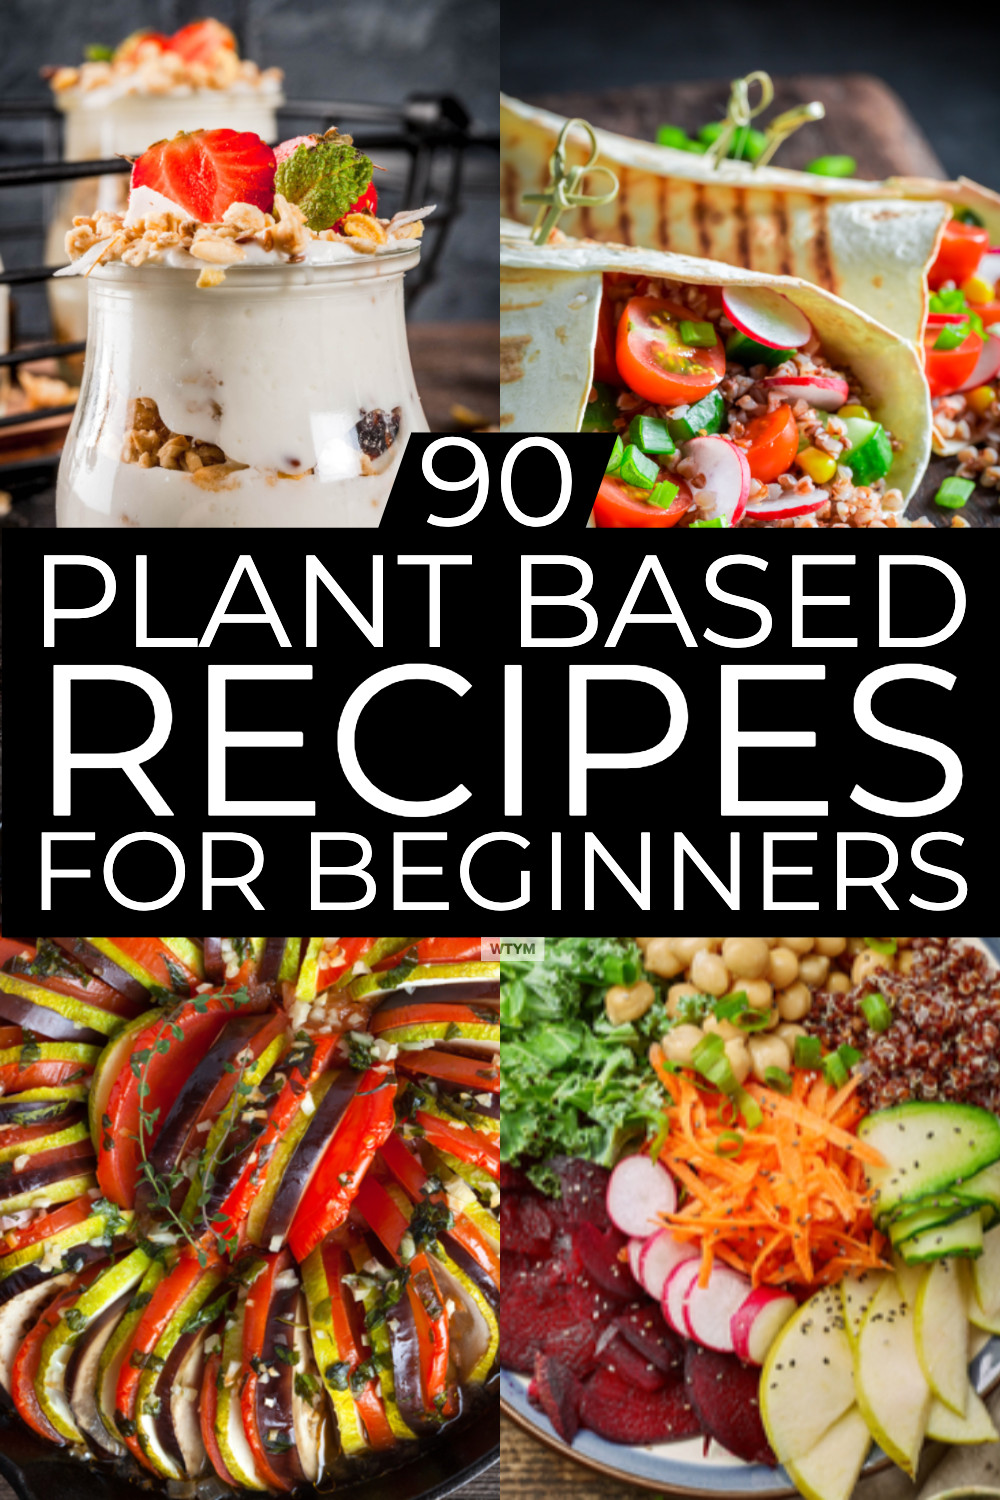 Plant Based Diet For Beginners To Lose Weight
 Plant Based Diet Meal Plan For Beginners 90 Plant Based